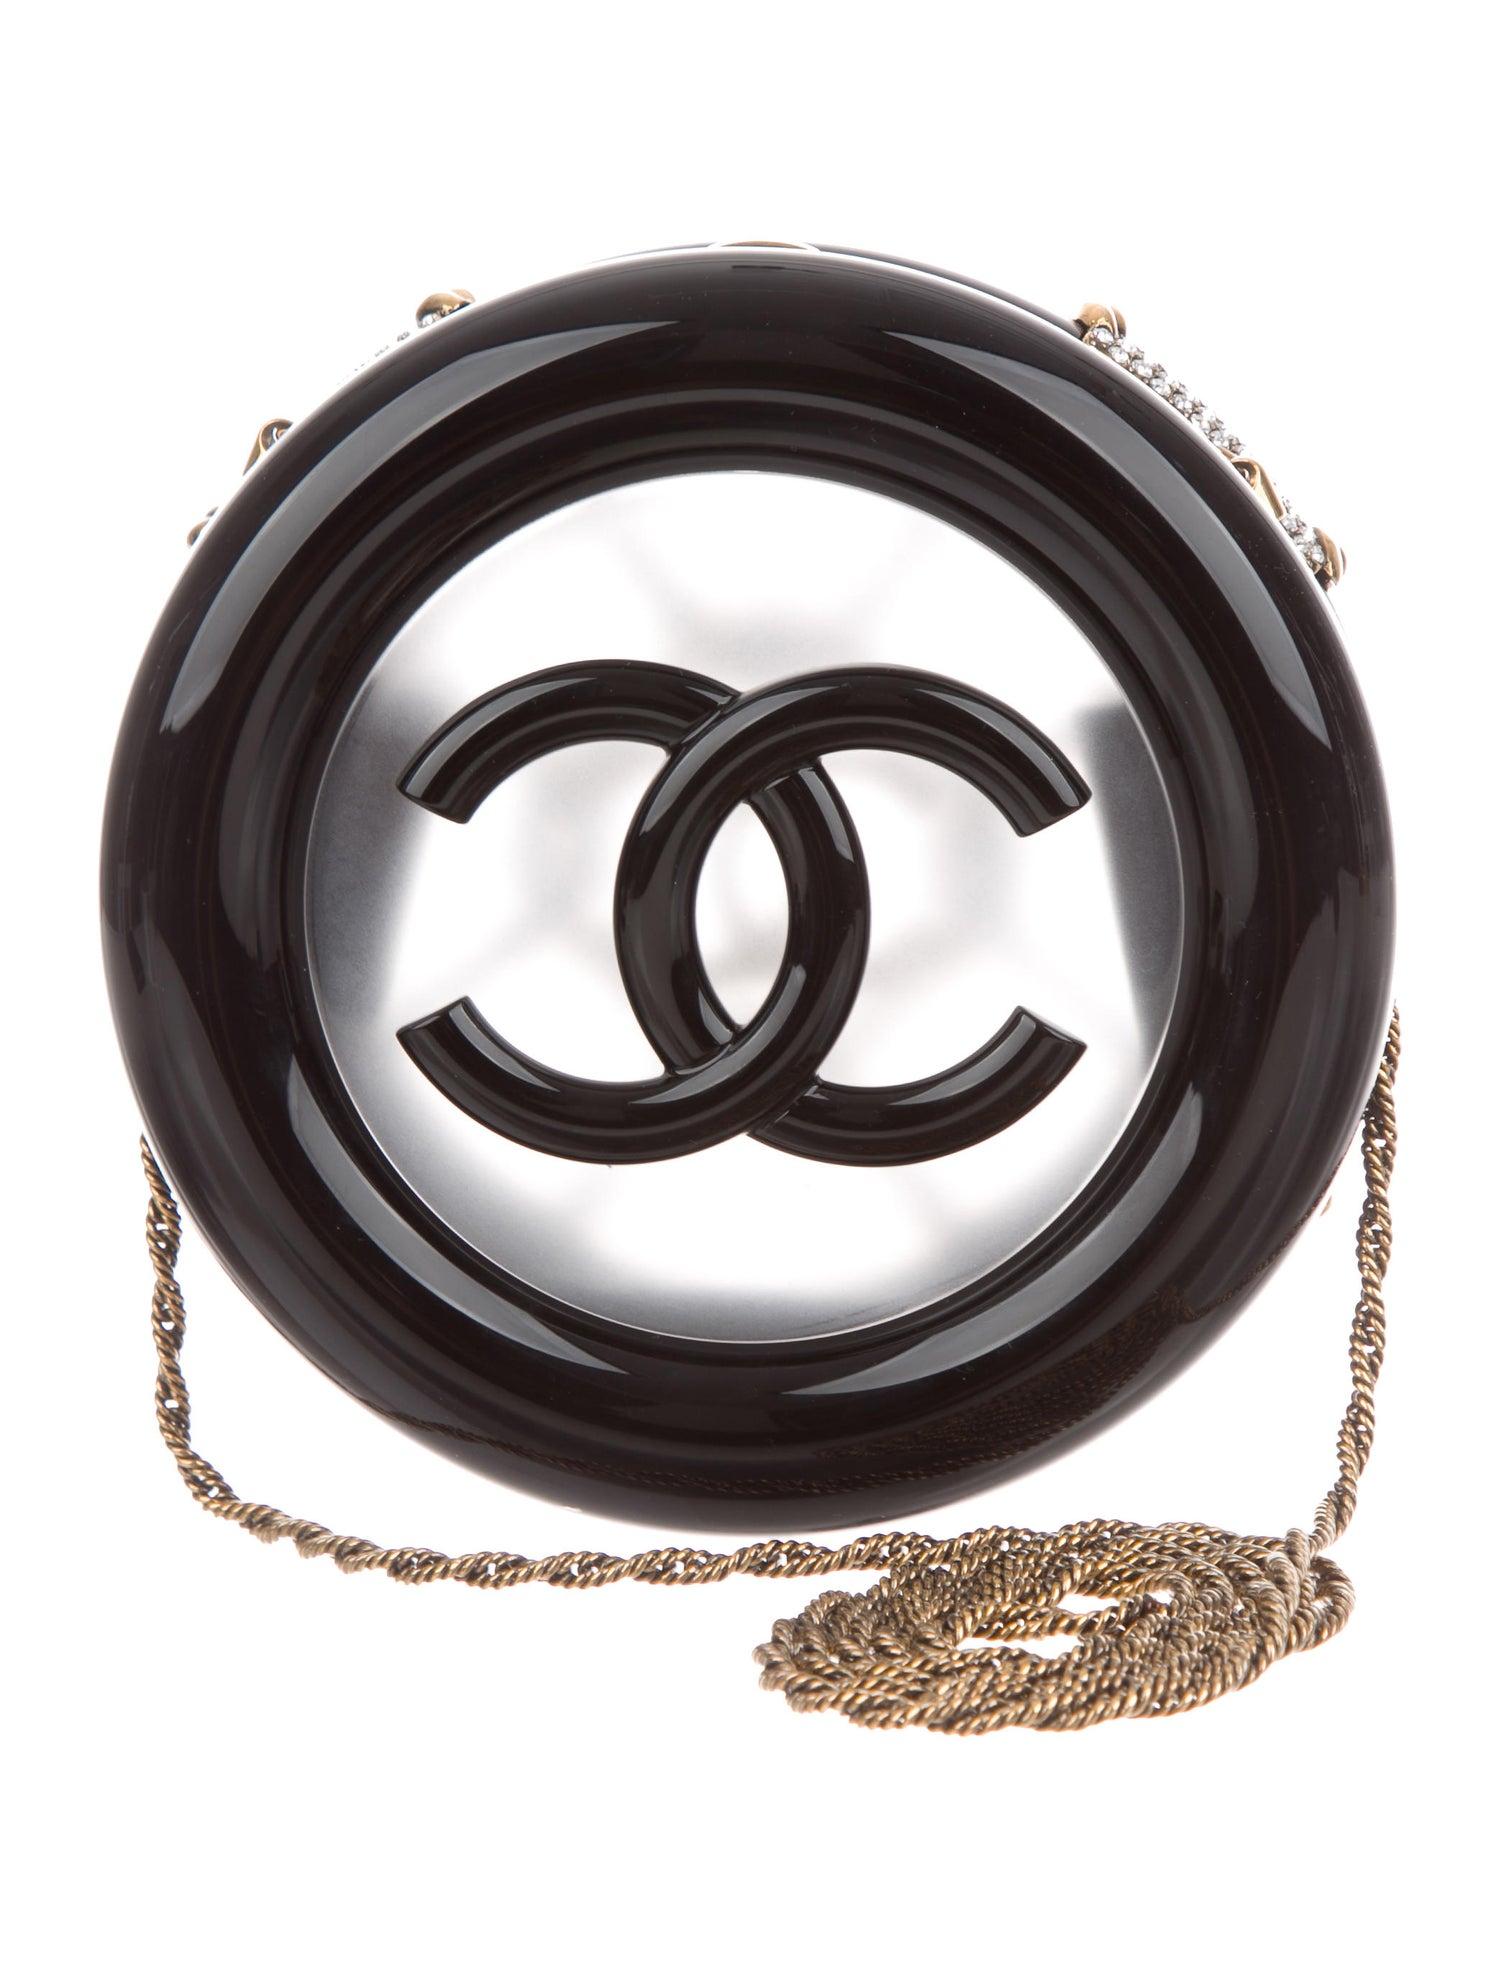 Chanel NEW Runway Black Crystal Gold Round La Pausa Evening Clutch Shoulder Bag in Box

Resin 
Crystal
Gold tone hardware
Leather lining 
Push lock closure
Shoulder strap drop 25